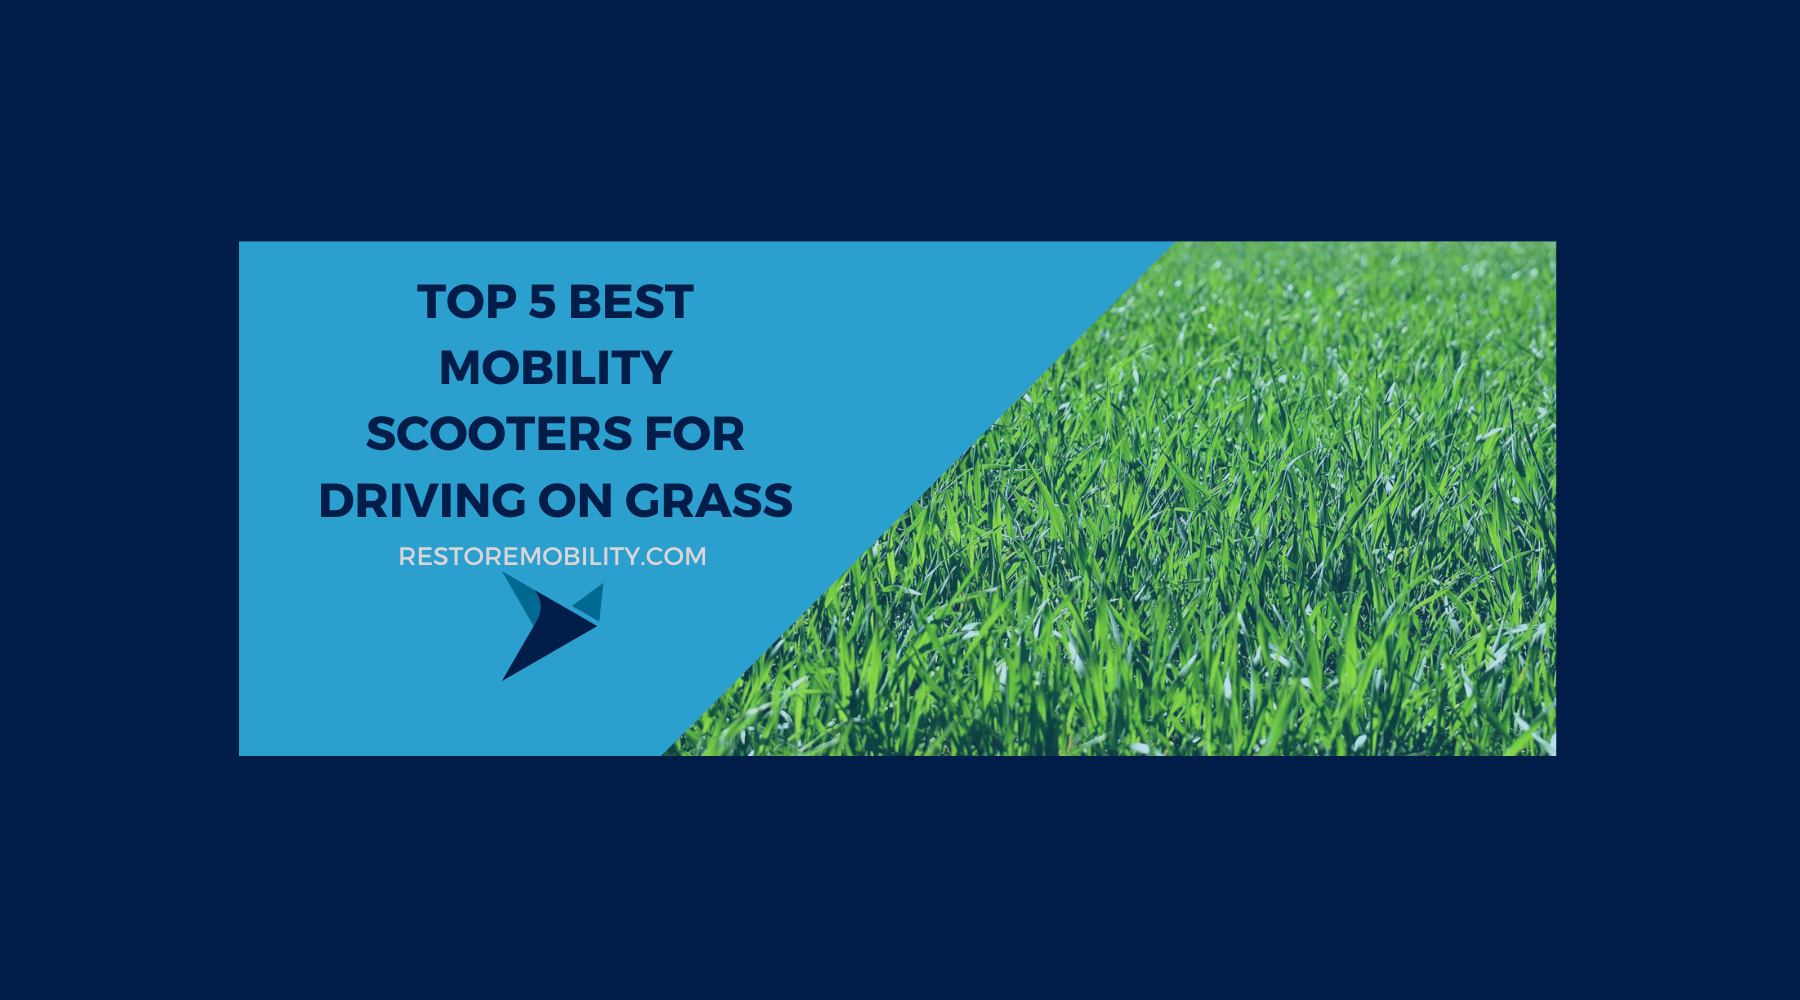 Top 5 Best Mobility Scooters for Grass (2023 Edition)